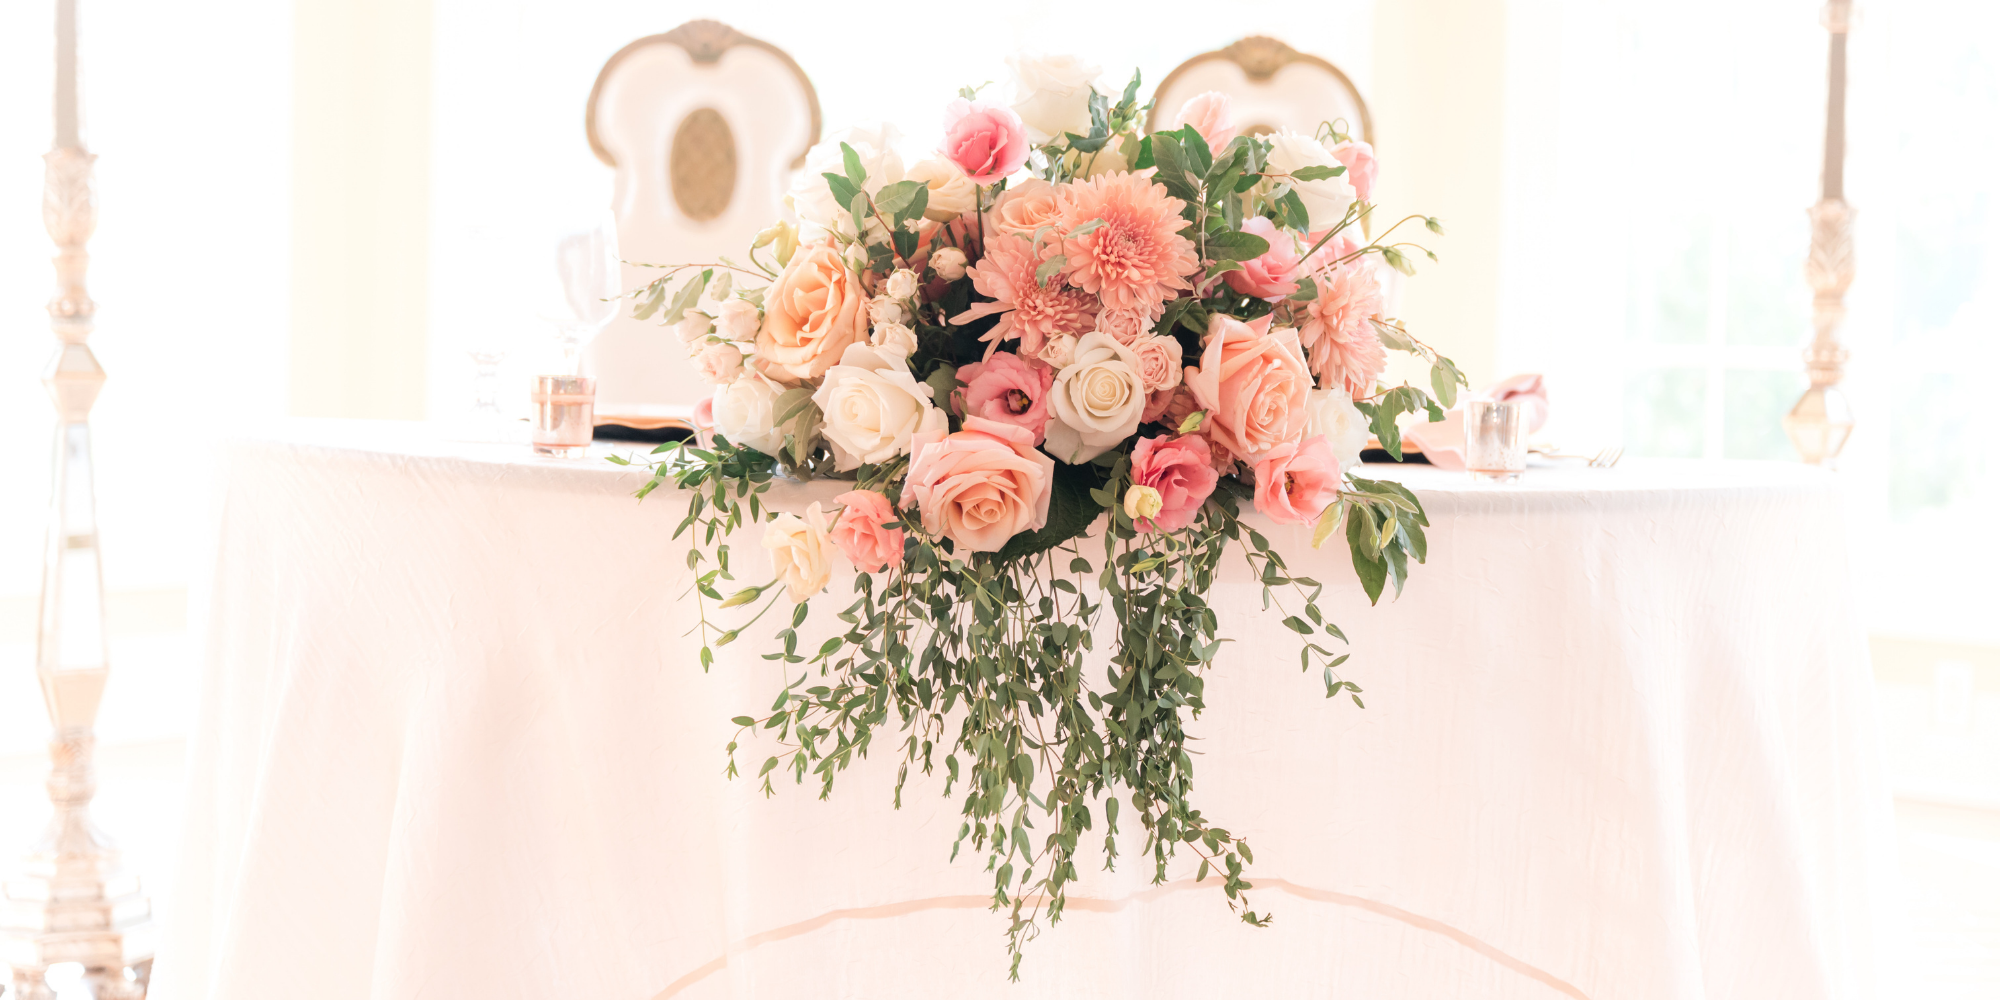 Pink and white rose and daisy wedding floral arrangement 